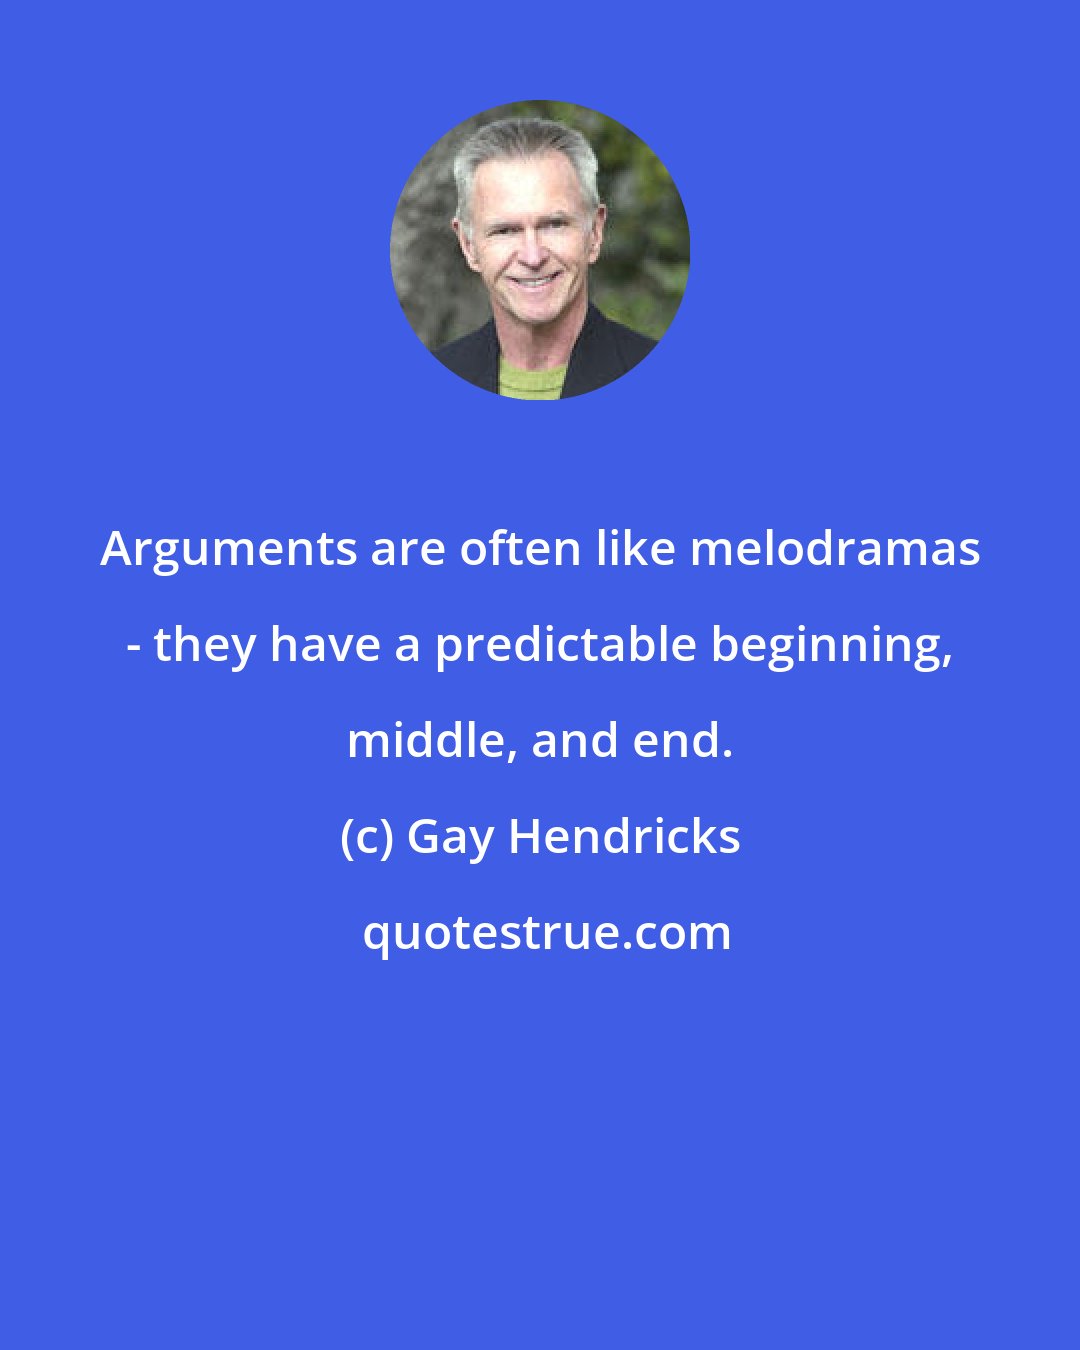 Gay Hendricks: Arguments are often like melodramas - they have a predictable beginning, middle, and end.